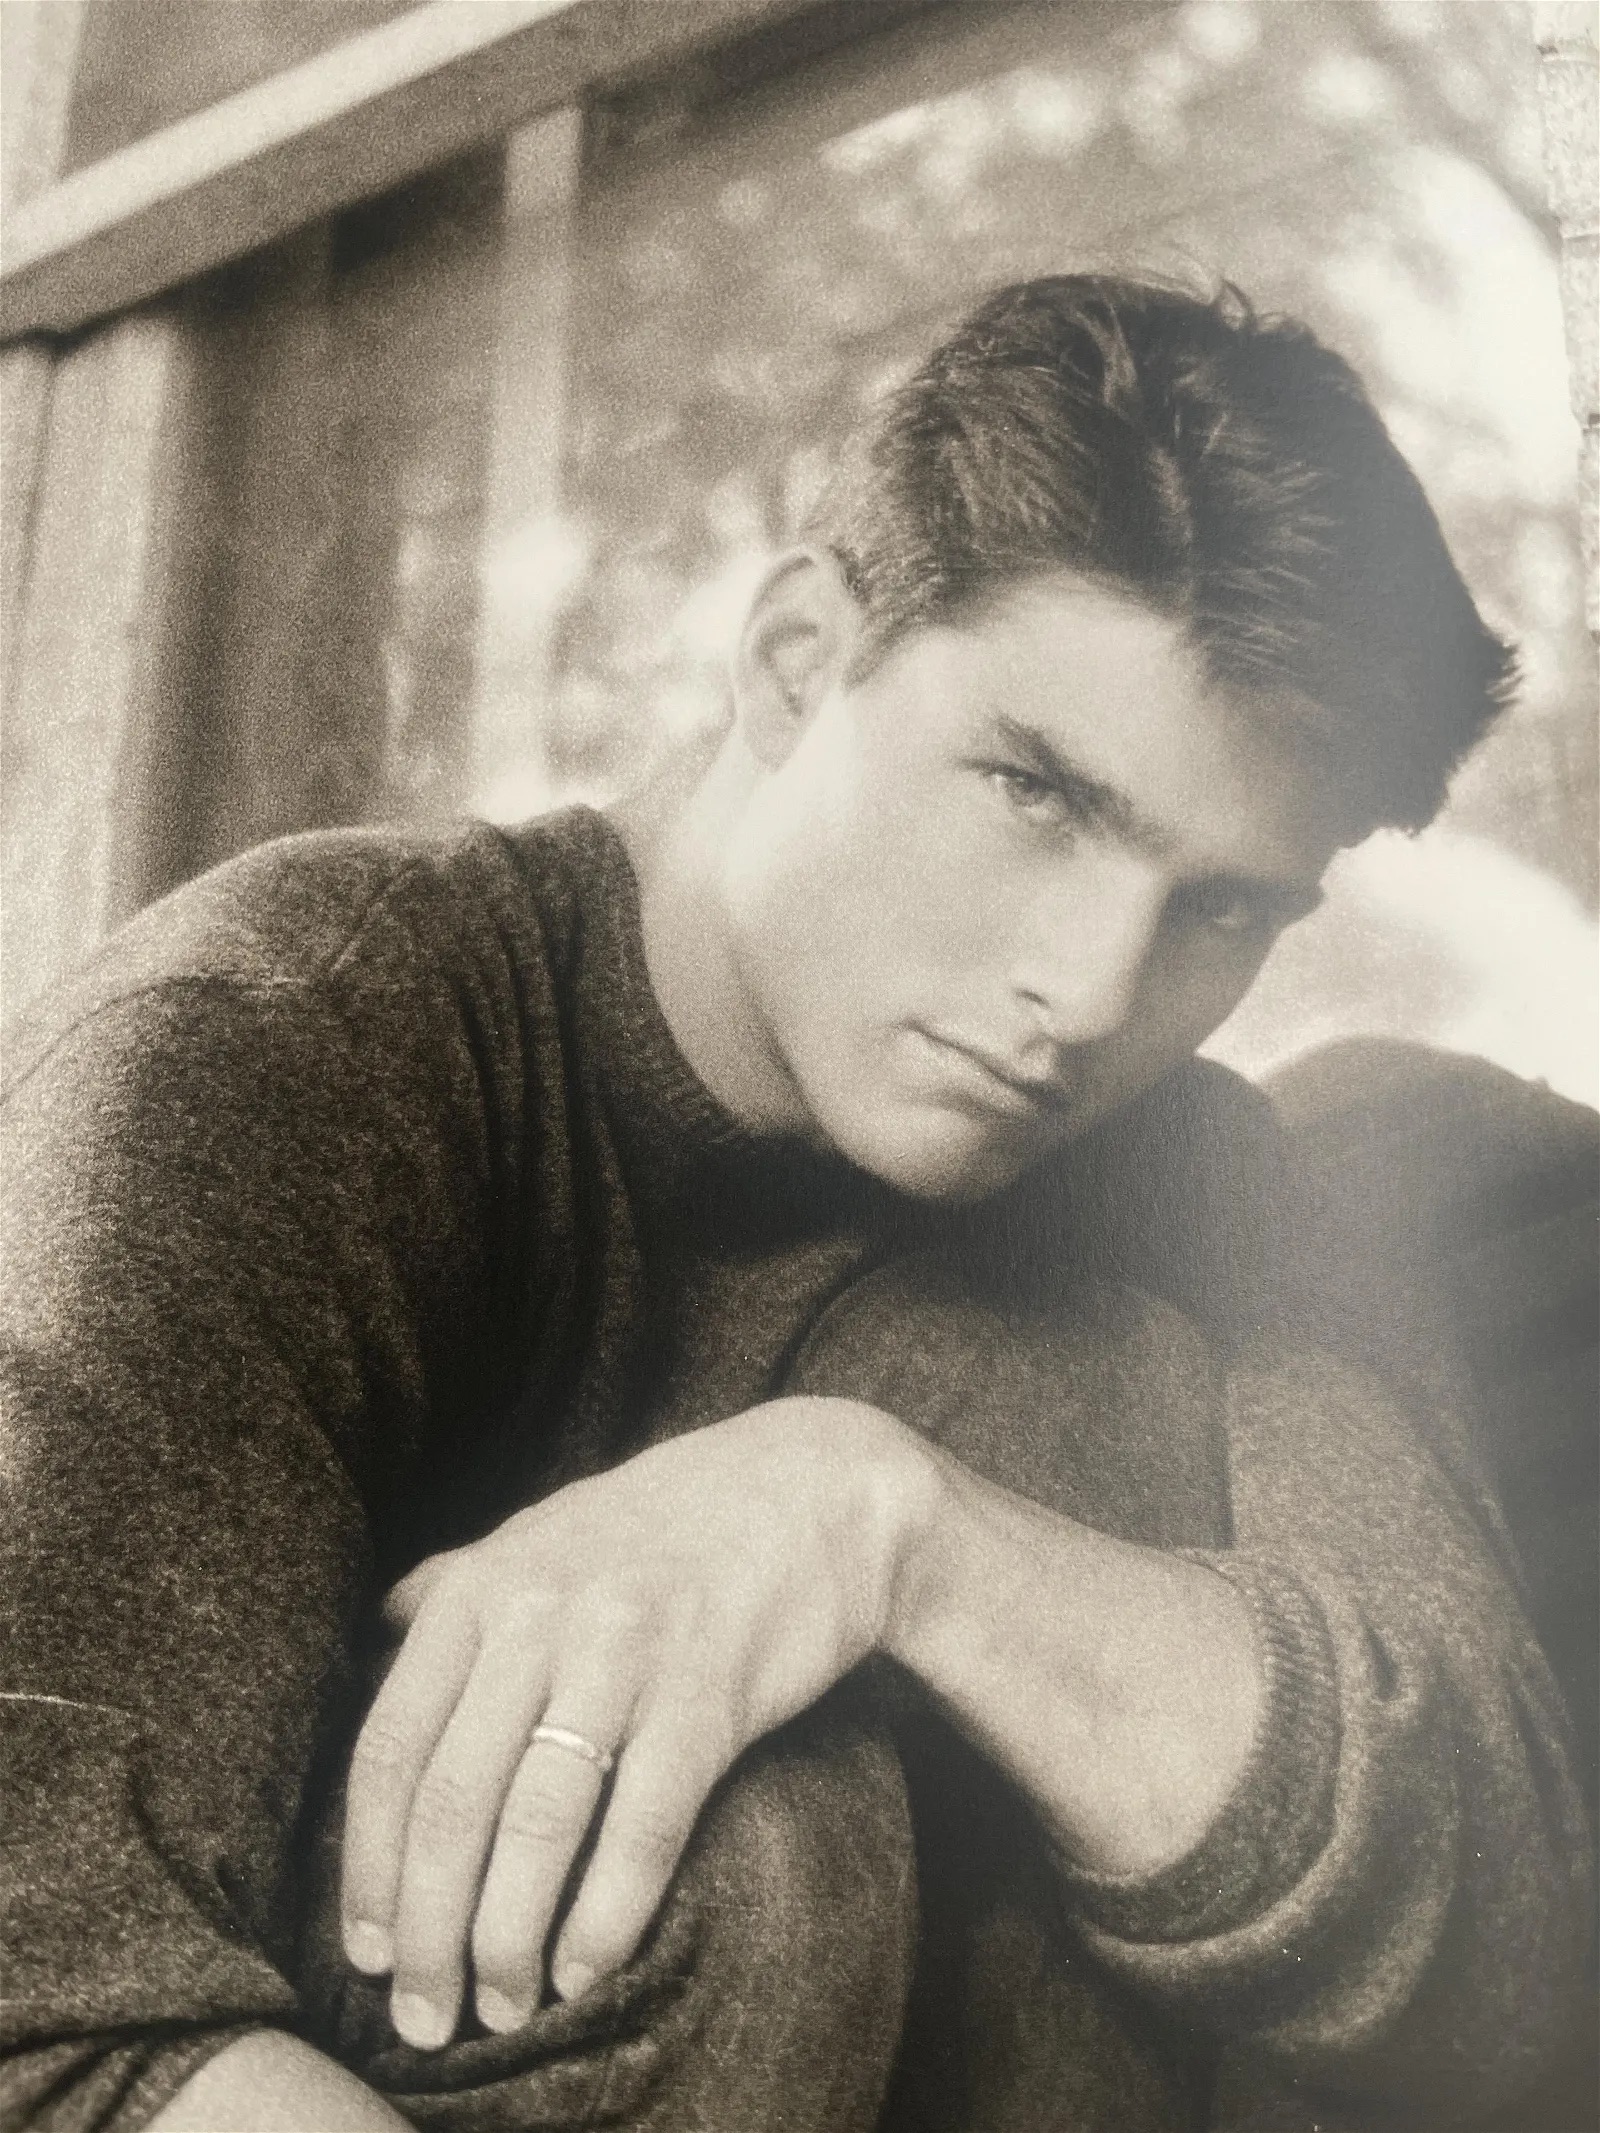 Herb Ritts "Tom Cruise, Dallas, 1988" Print - Image 5 of 5